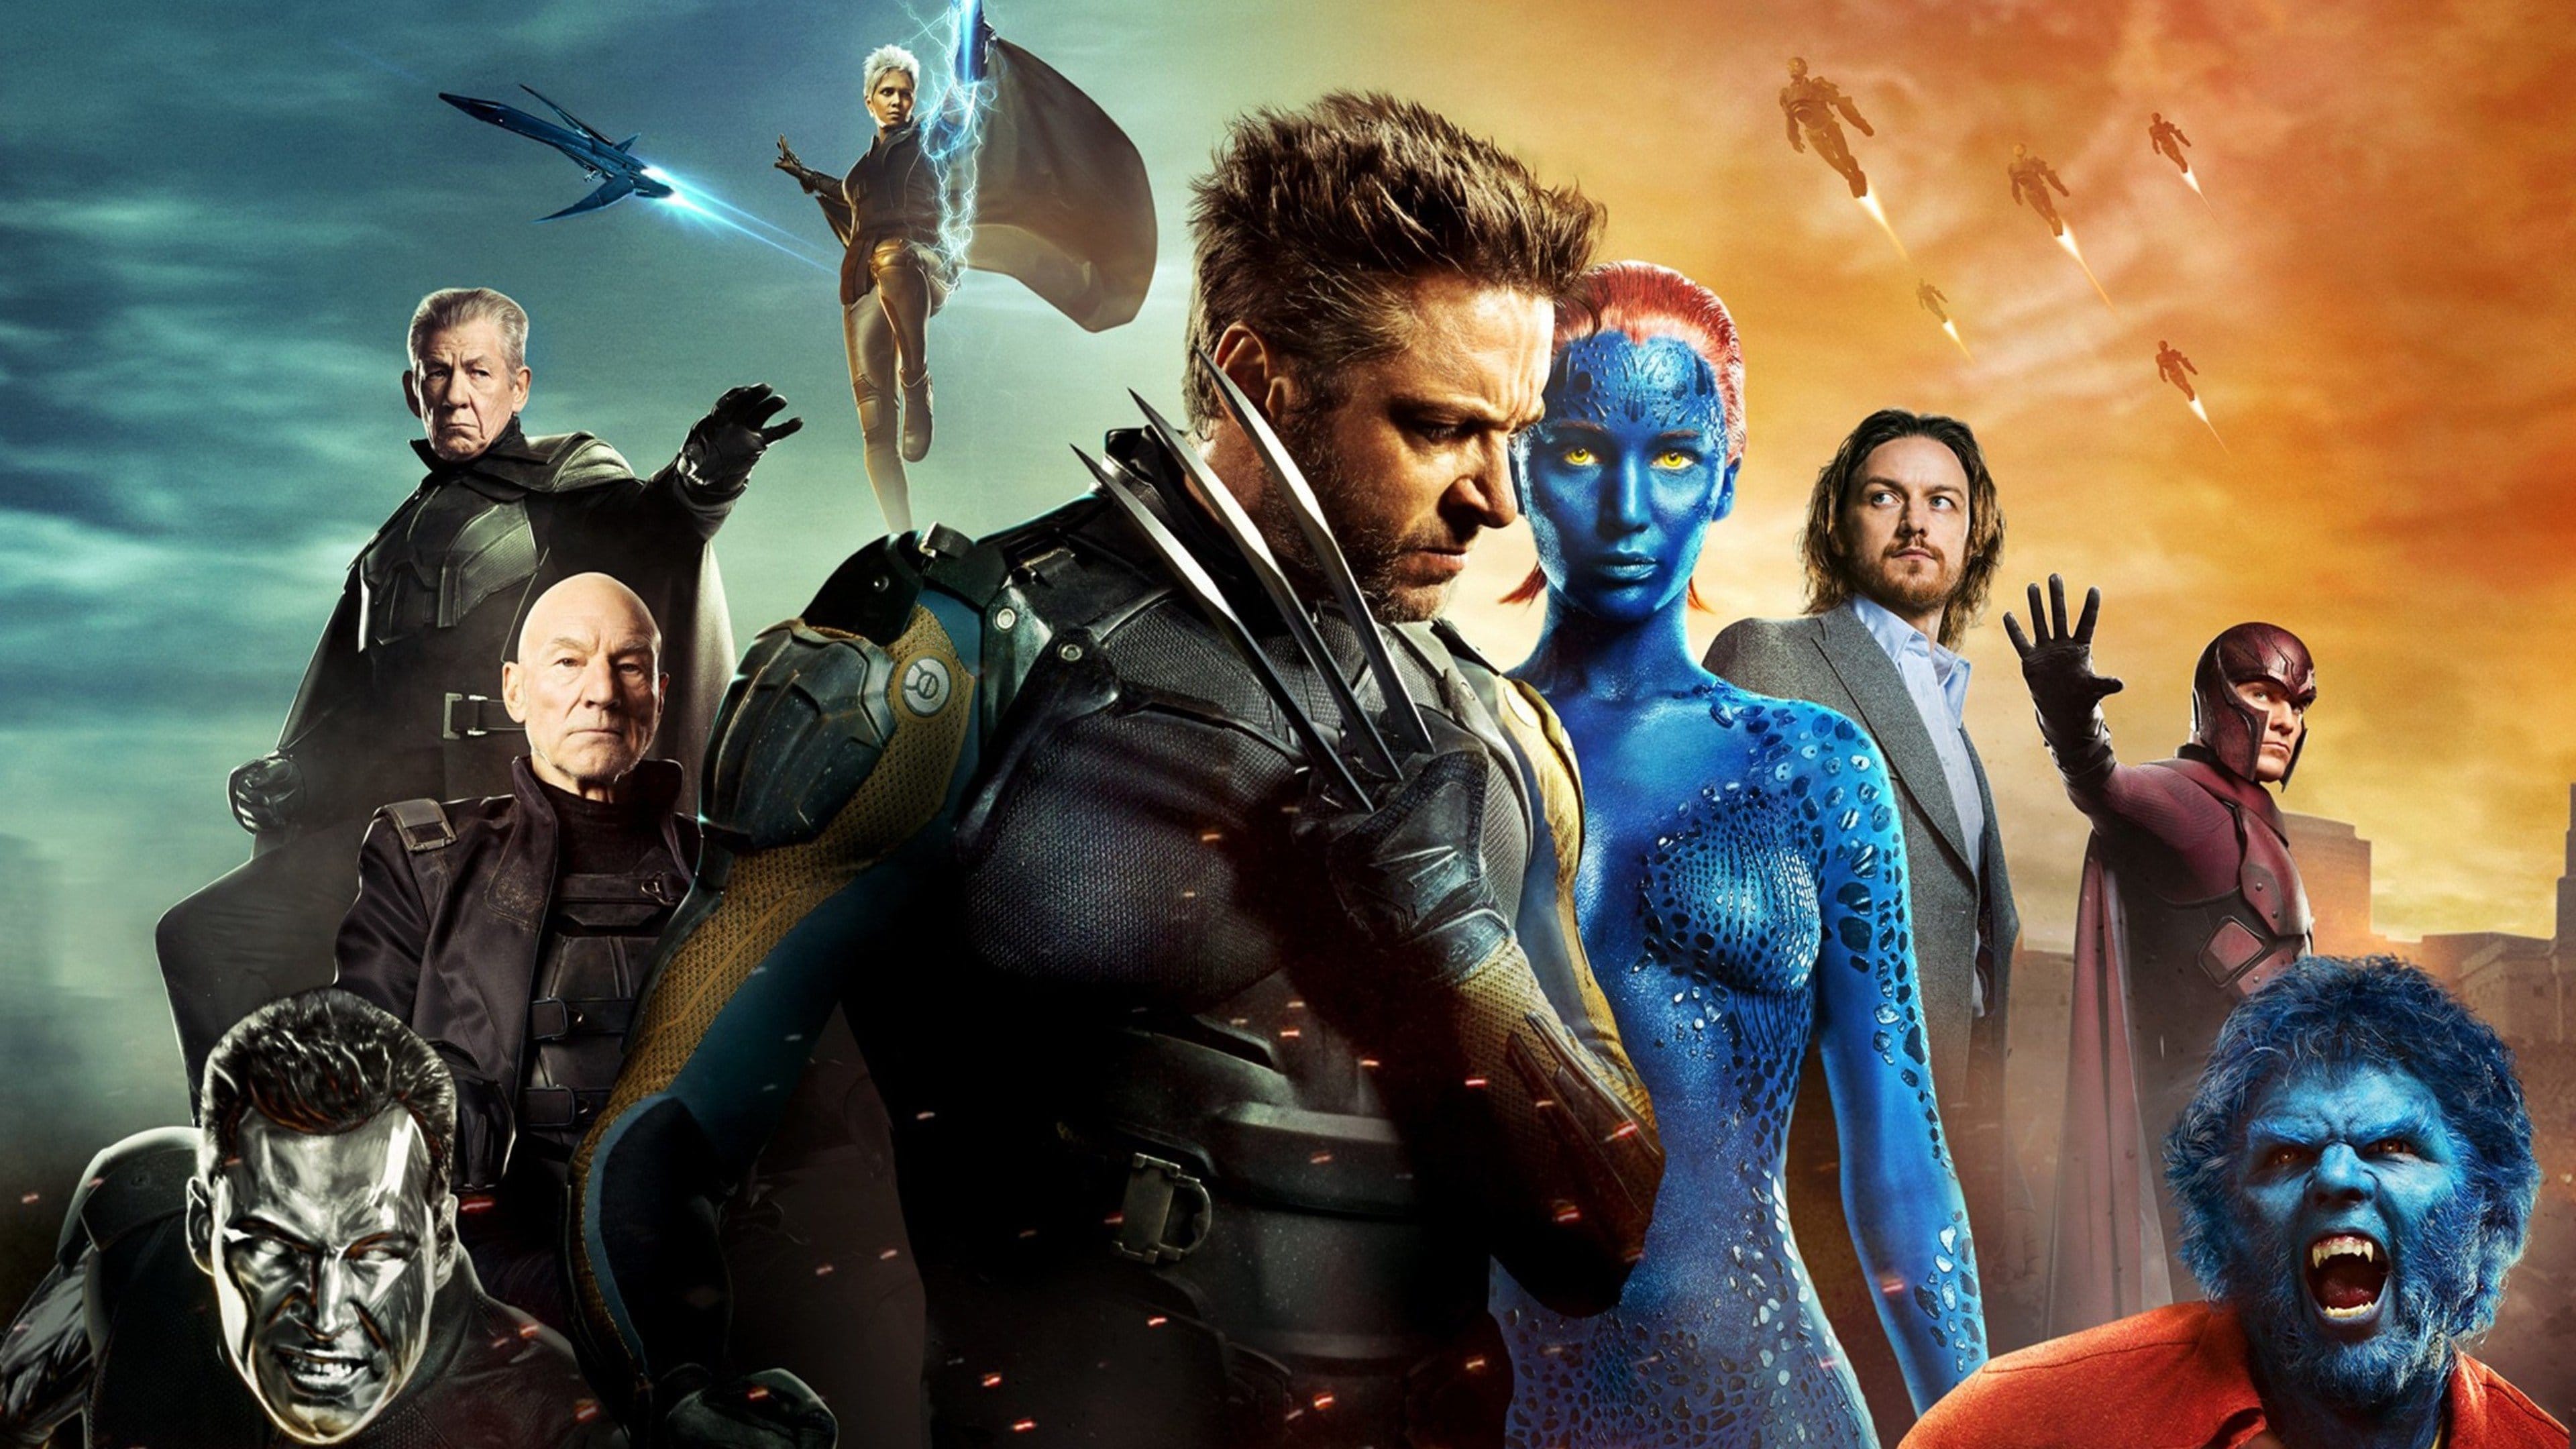 Days Of Future Past Wallpaper. Days Of Future Past Magneto Wallpaper, Days Of Future Past Wallpaper And X Men Days Of Future Past Wallpaper